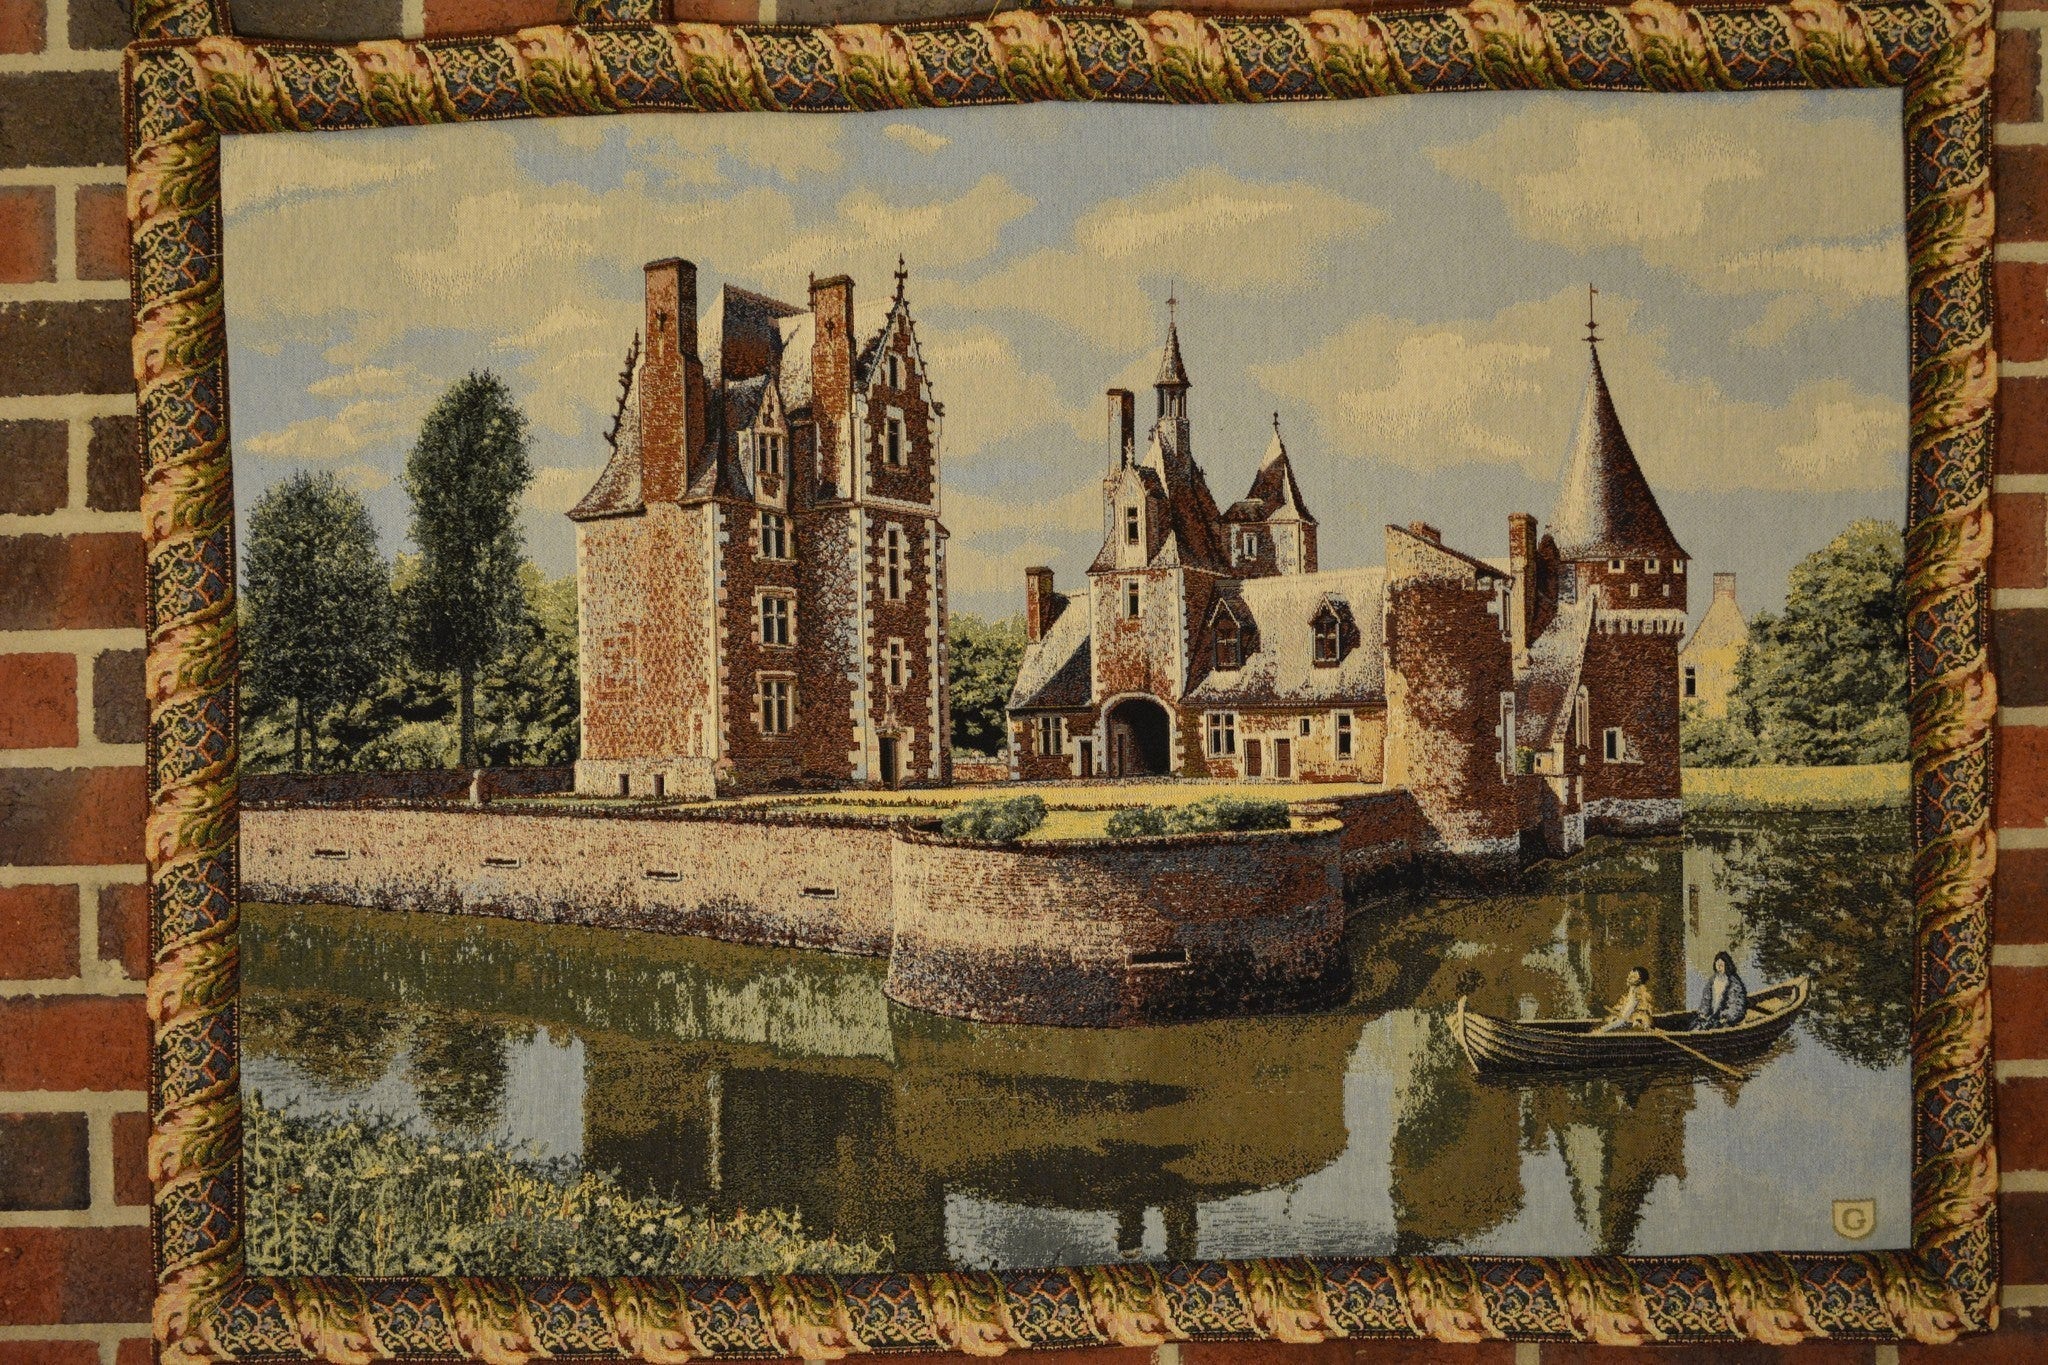 Tache Tapestry Victorian Summertime Manor Landscape Woven Wall Hanging (3562HL2) - Tache Home Fashion